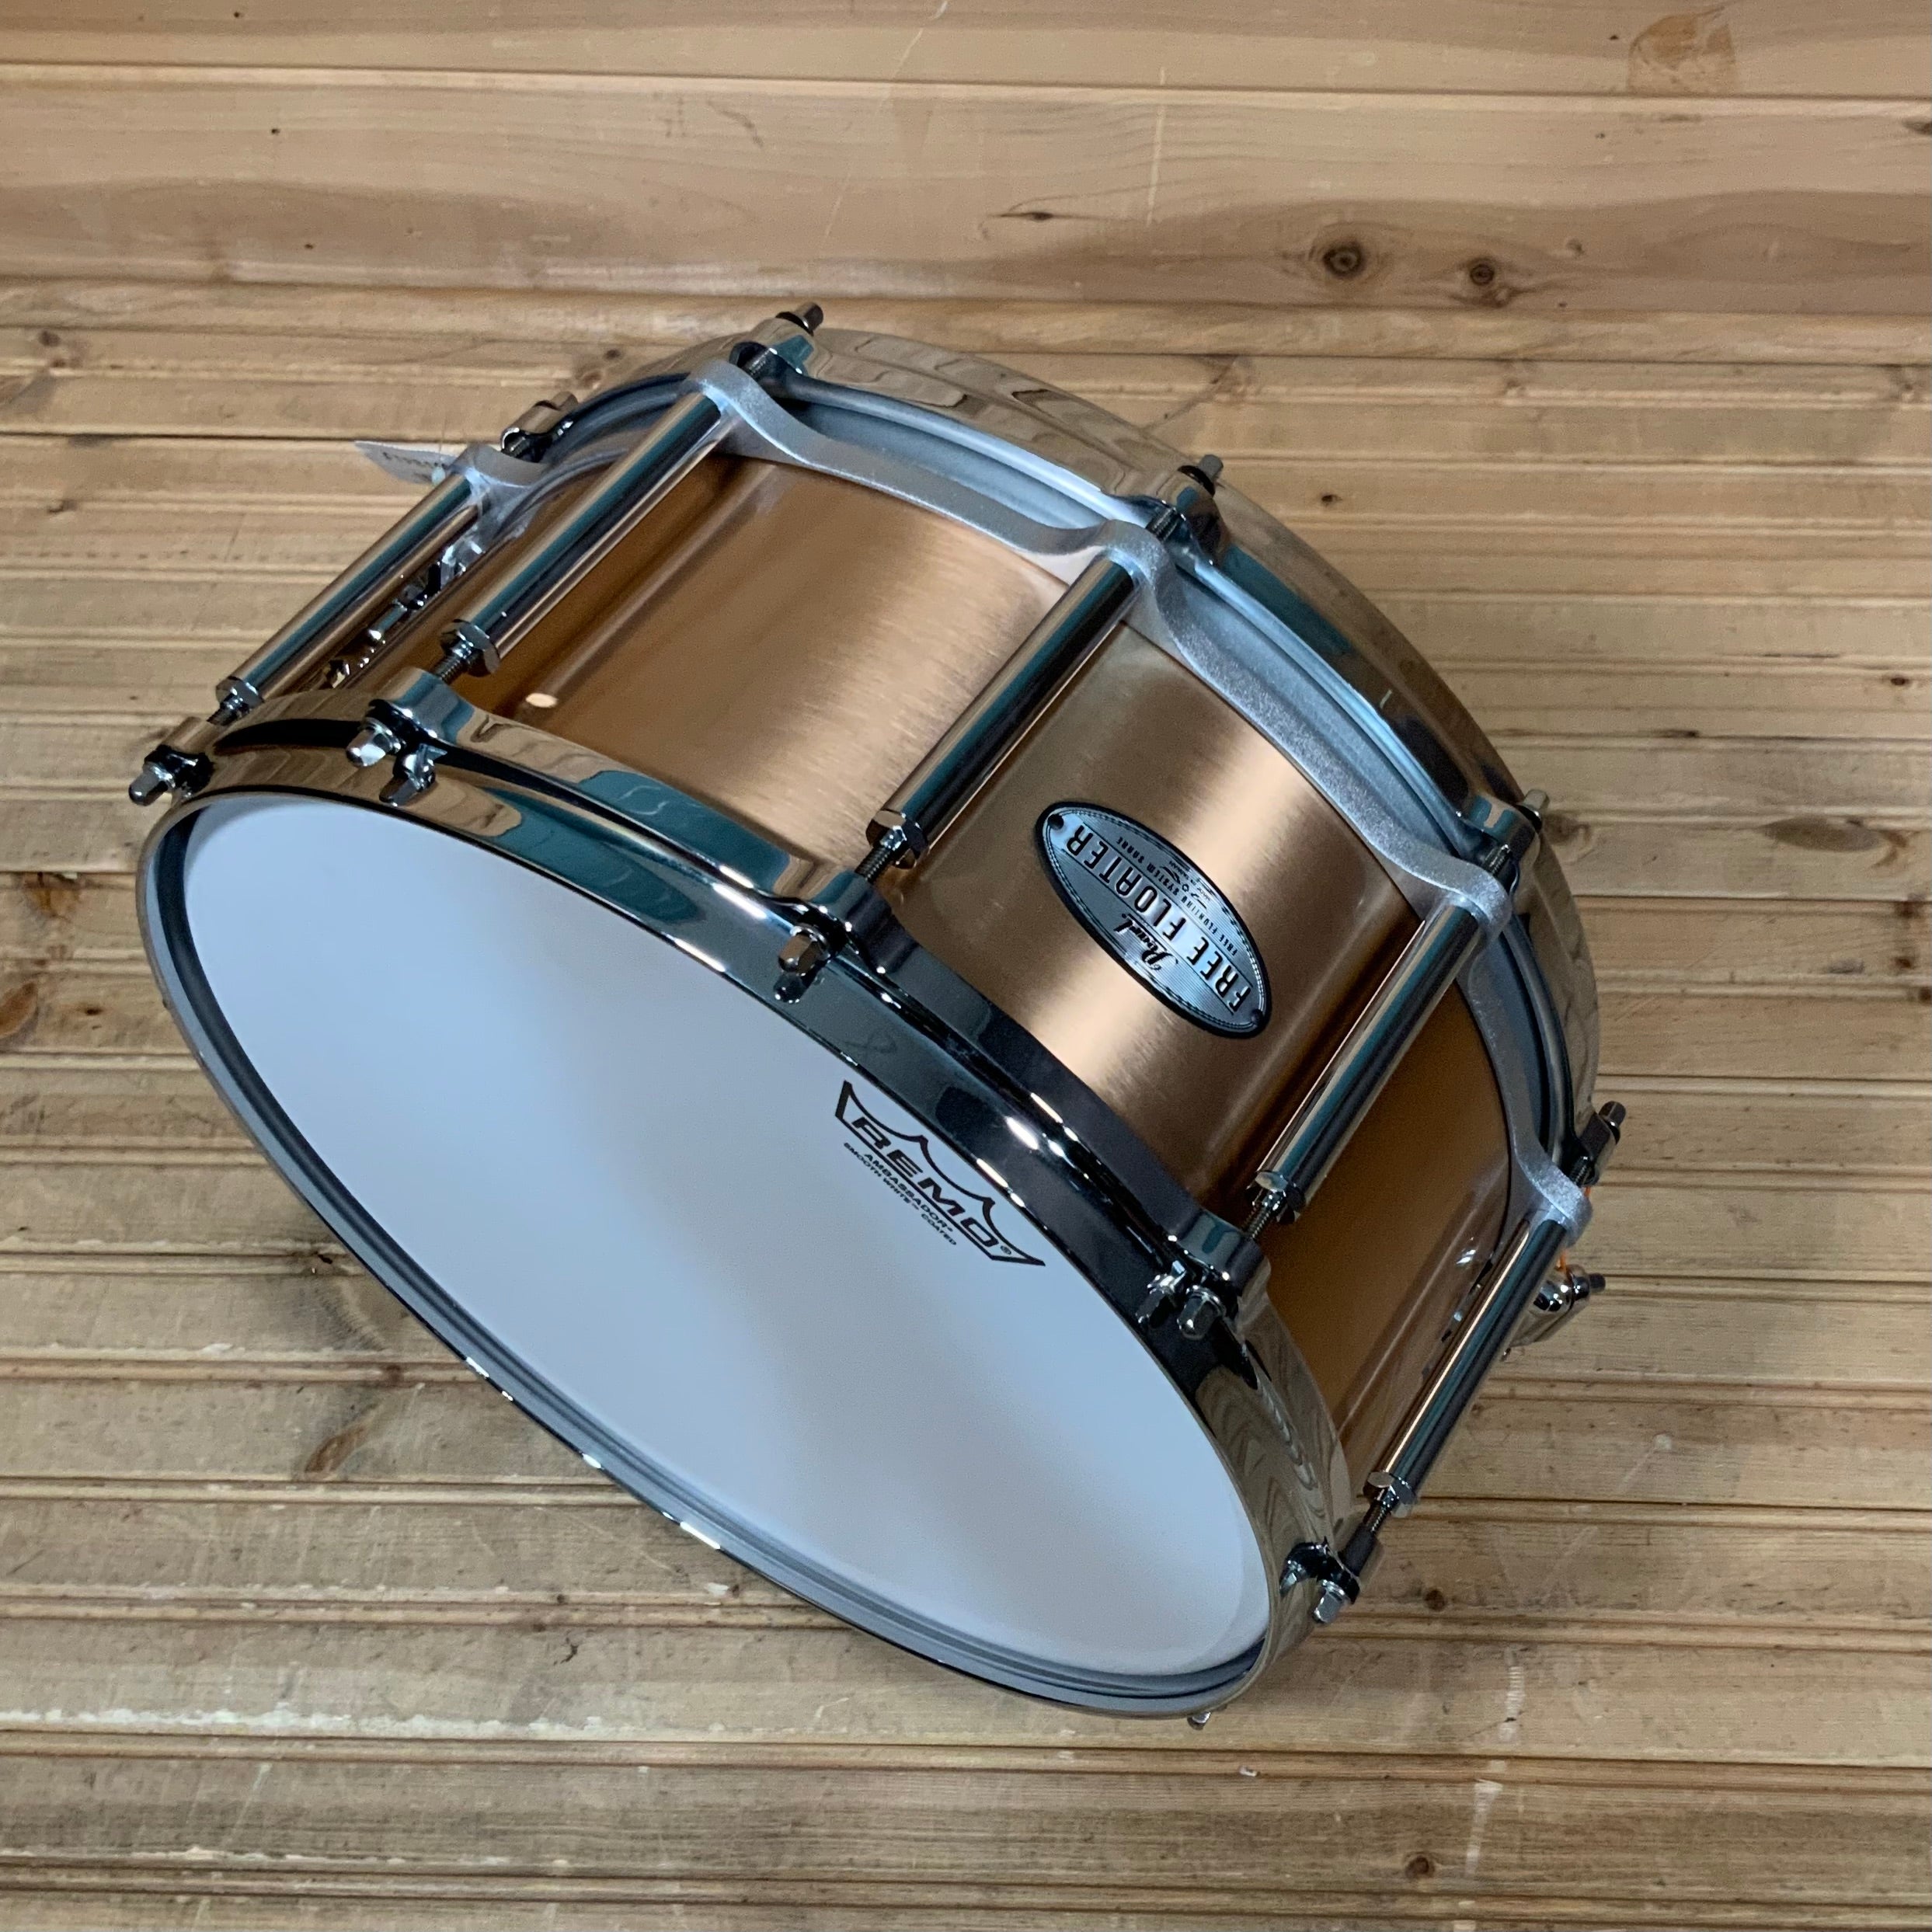 Pearl Free Floating Steel Snare 14 x 6.5in